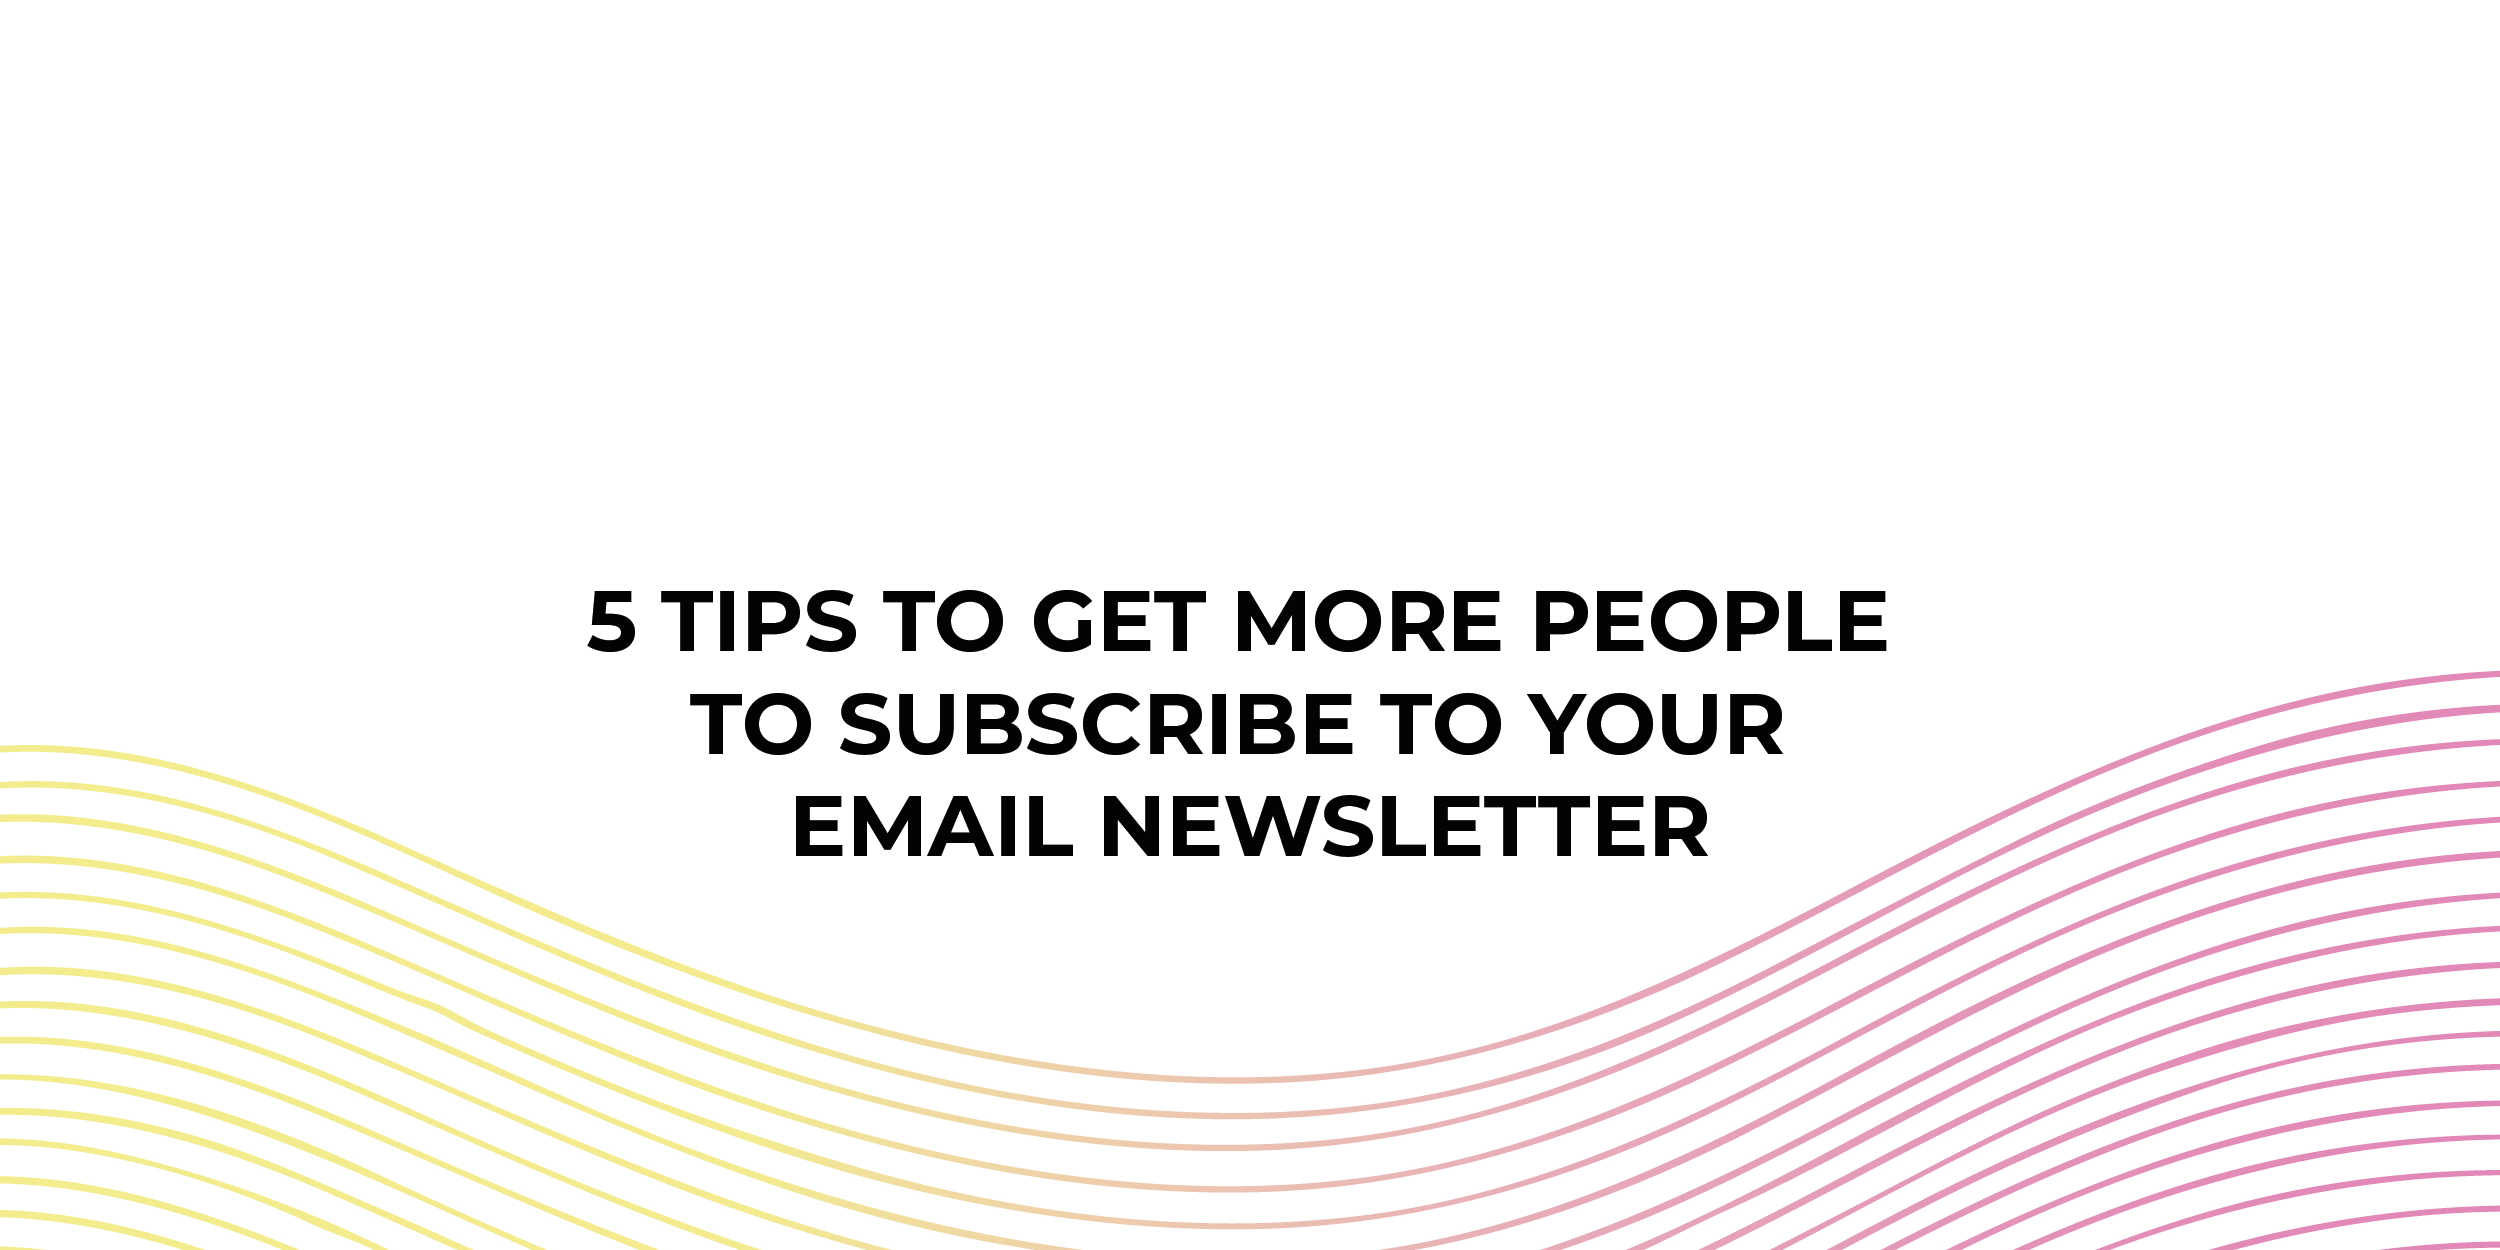 5 Tips to Get More People to Subscribe to Your Email Newsletter